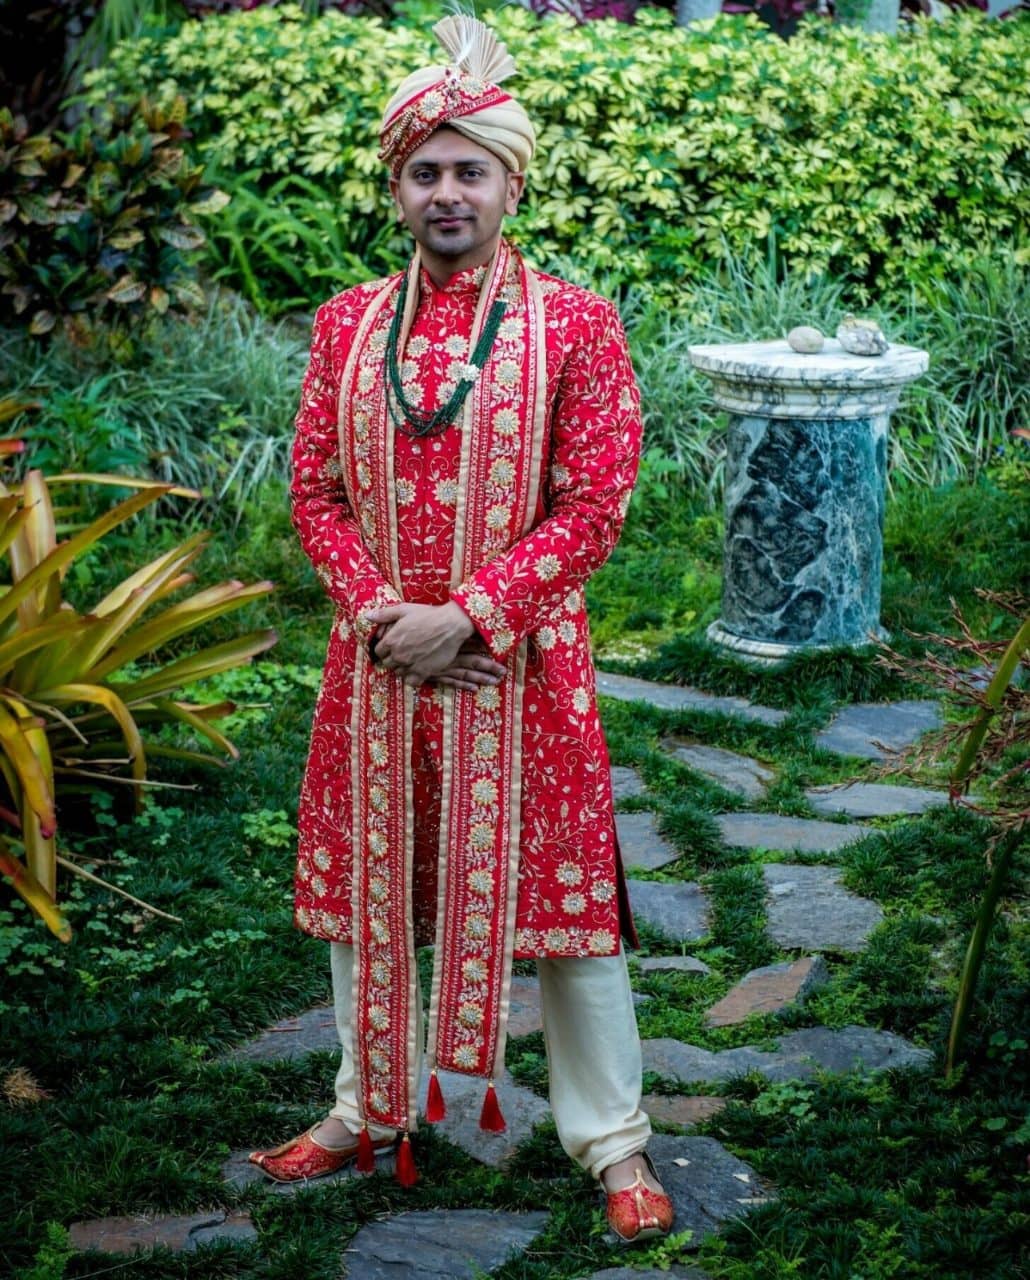 The Red Floral Sherwani